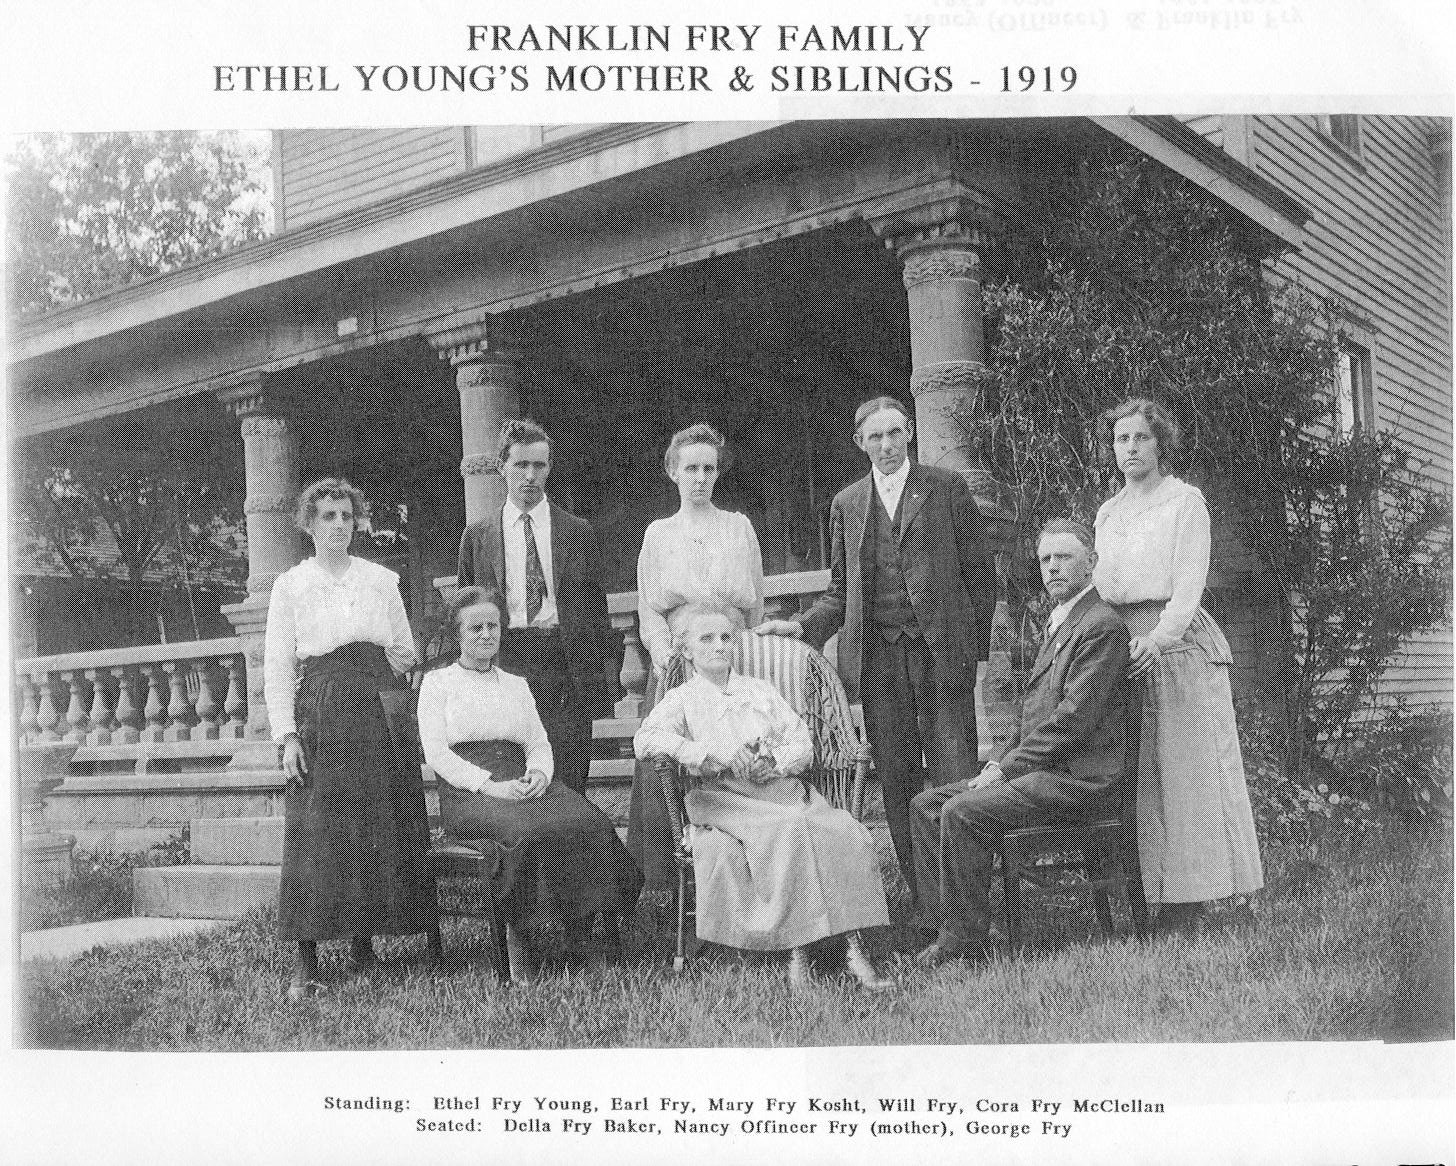 Flora Ethel Fry Young, James Earl Fry, Mary Catherine Fry Kohst, William D. Fry, Cora Fry McLelland, Della Fry Baker, George Benton Fry and their mother.